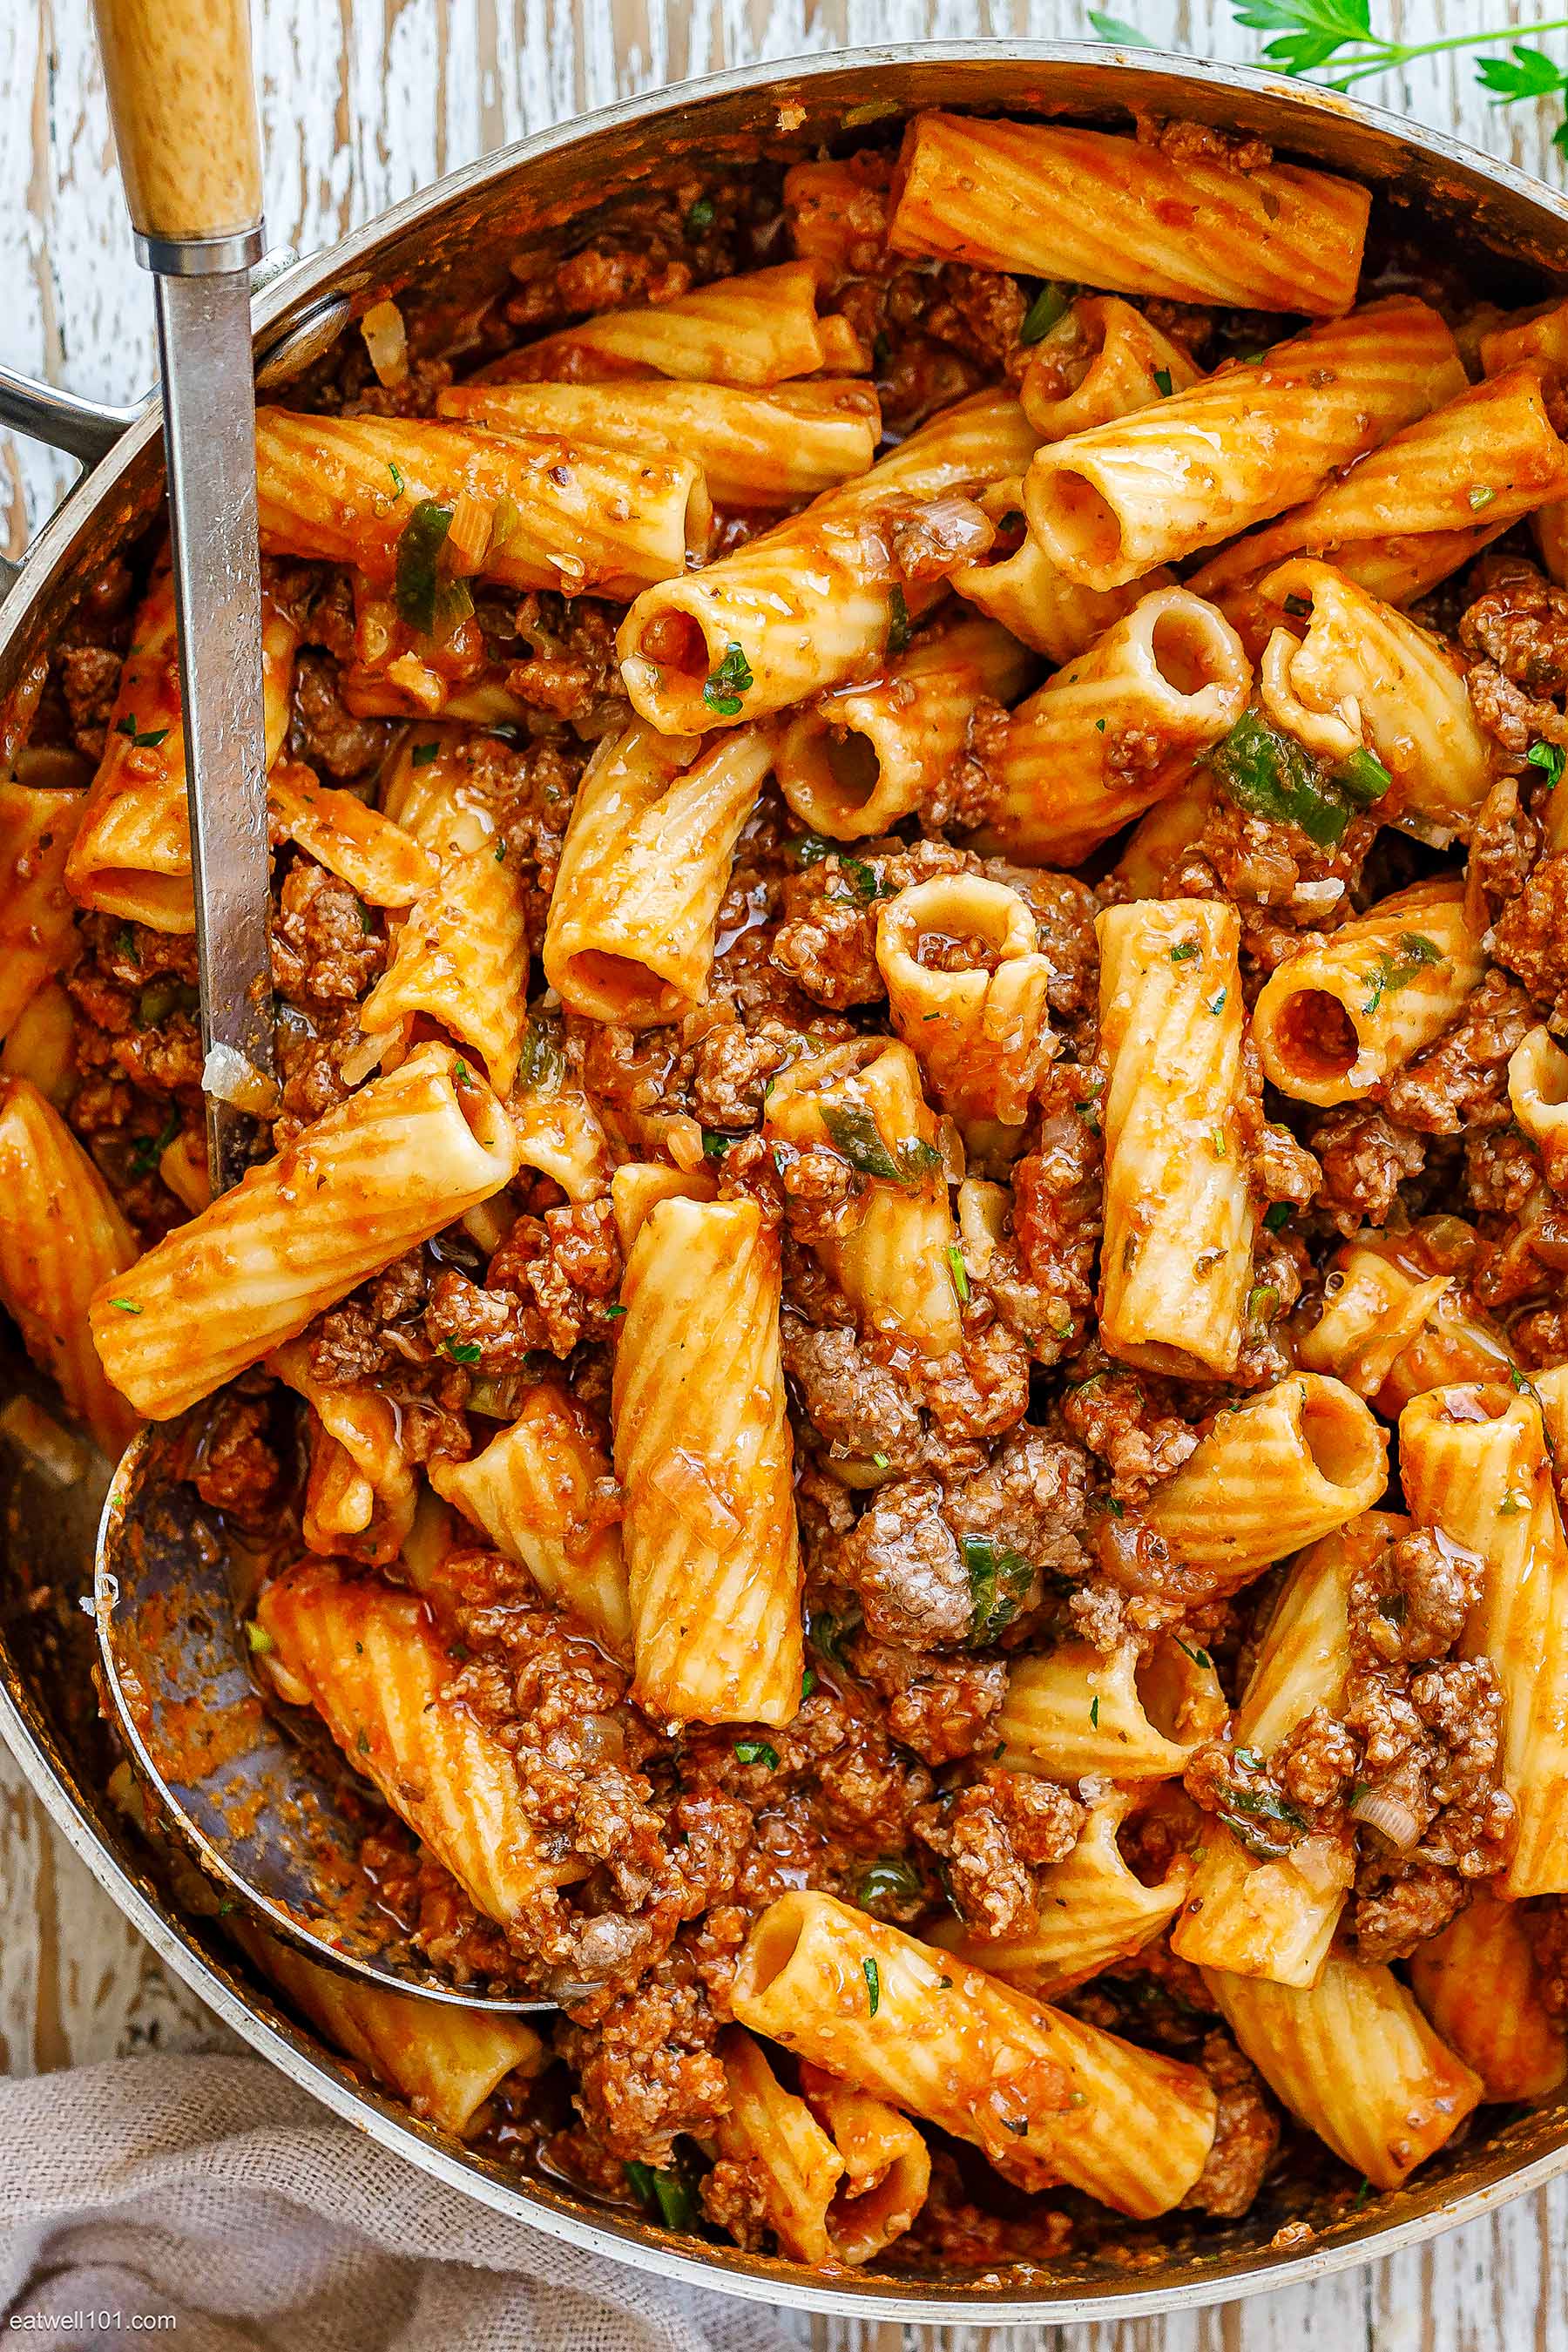 Penne Pasta with Meat Sauce Recipe